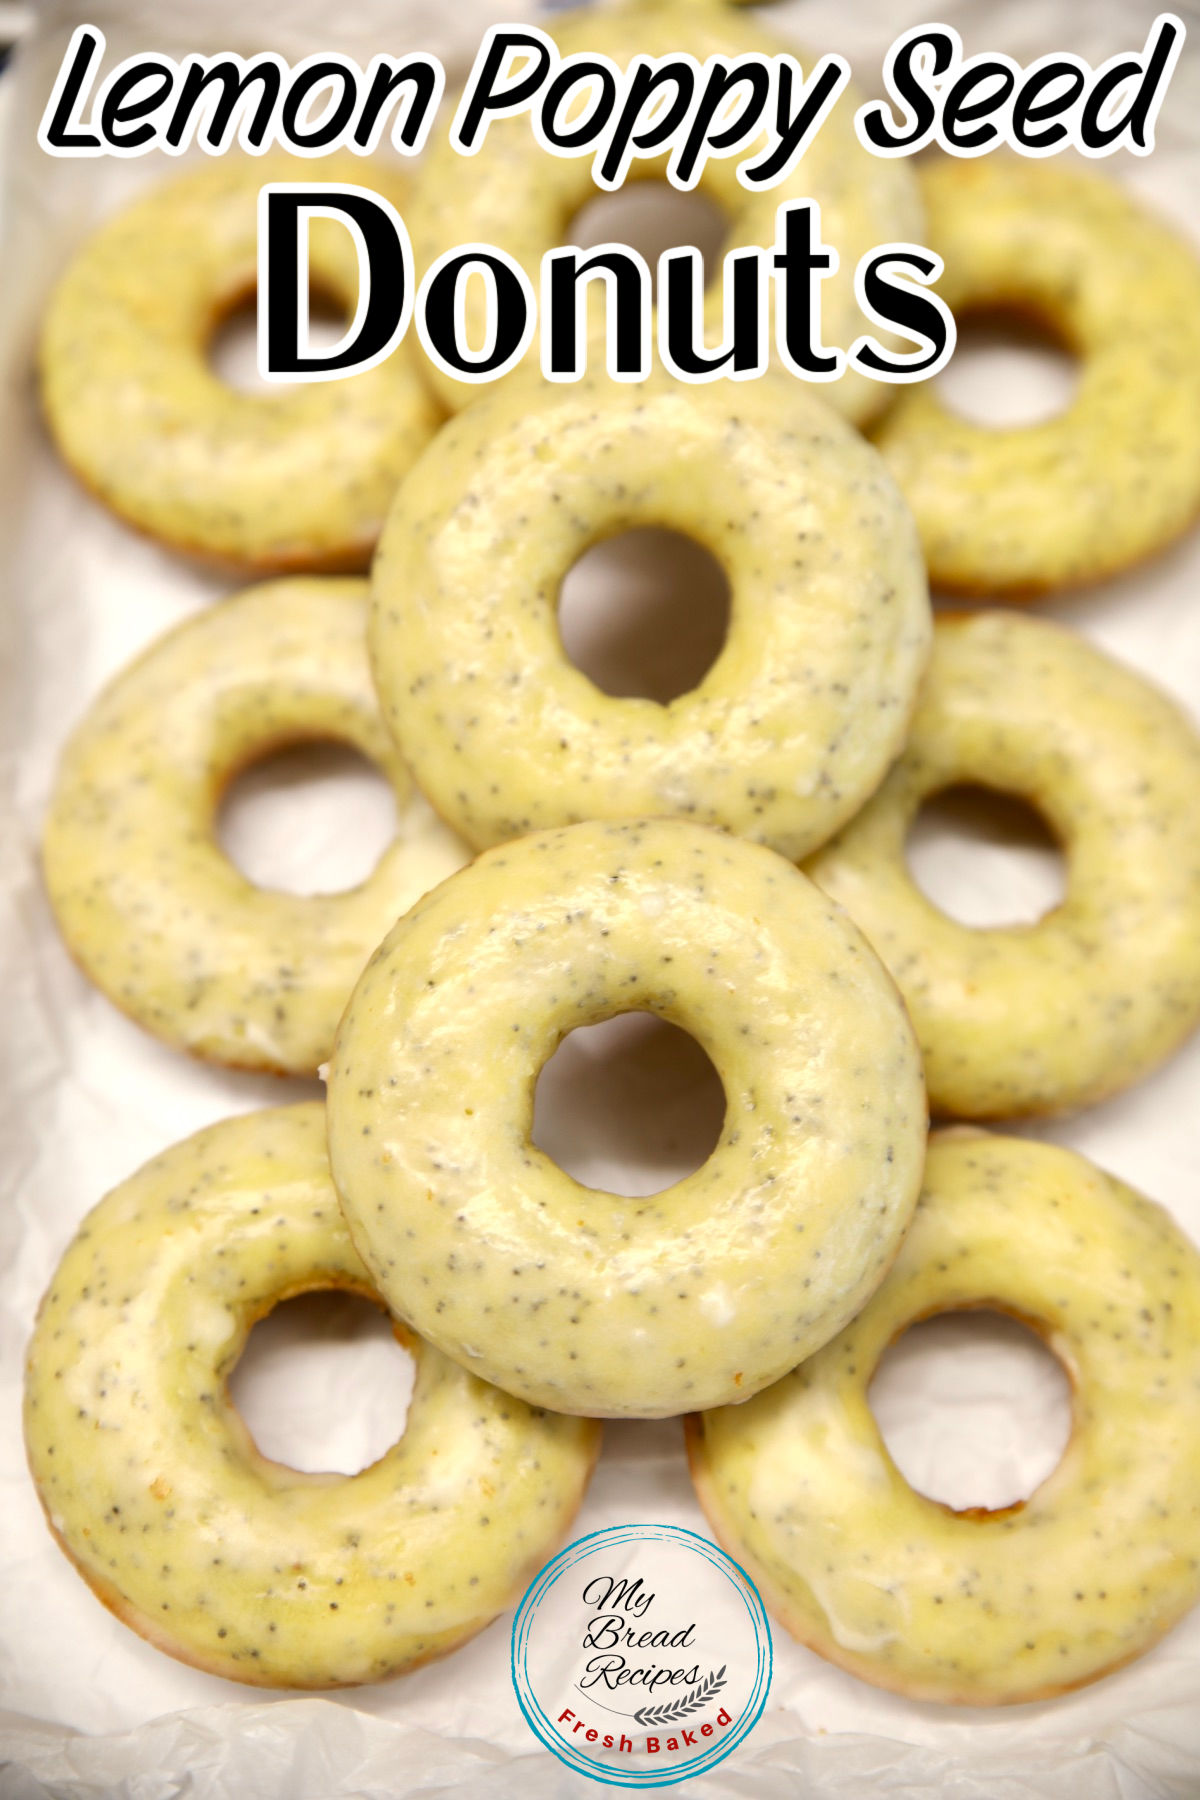 Lemon Poppy Seed Donuts on a platter- text overlay.